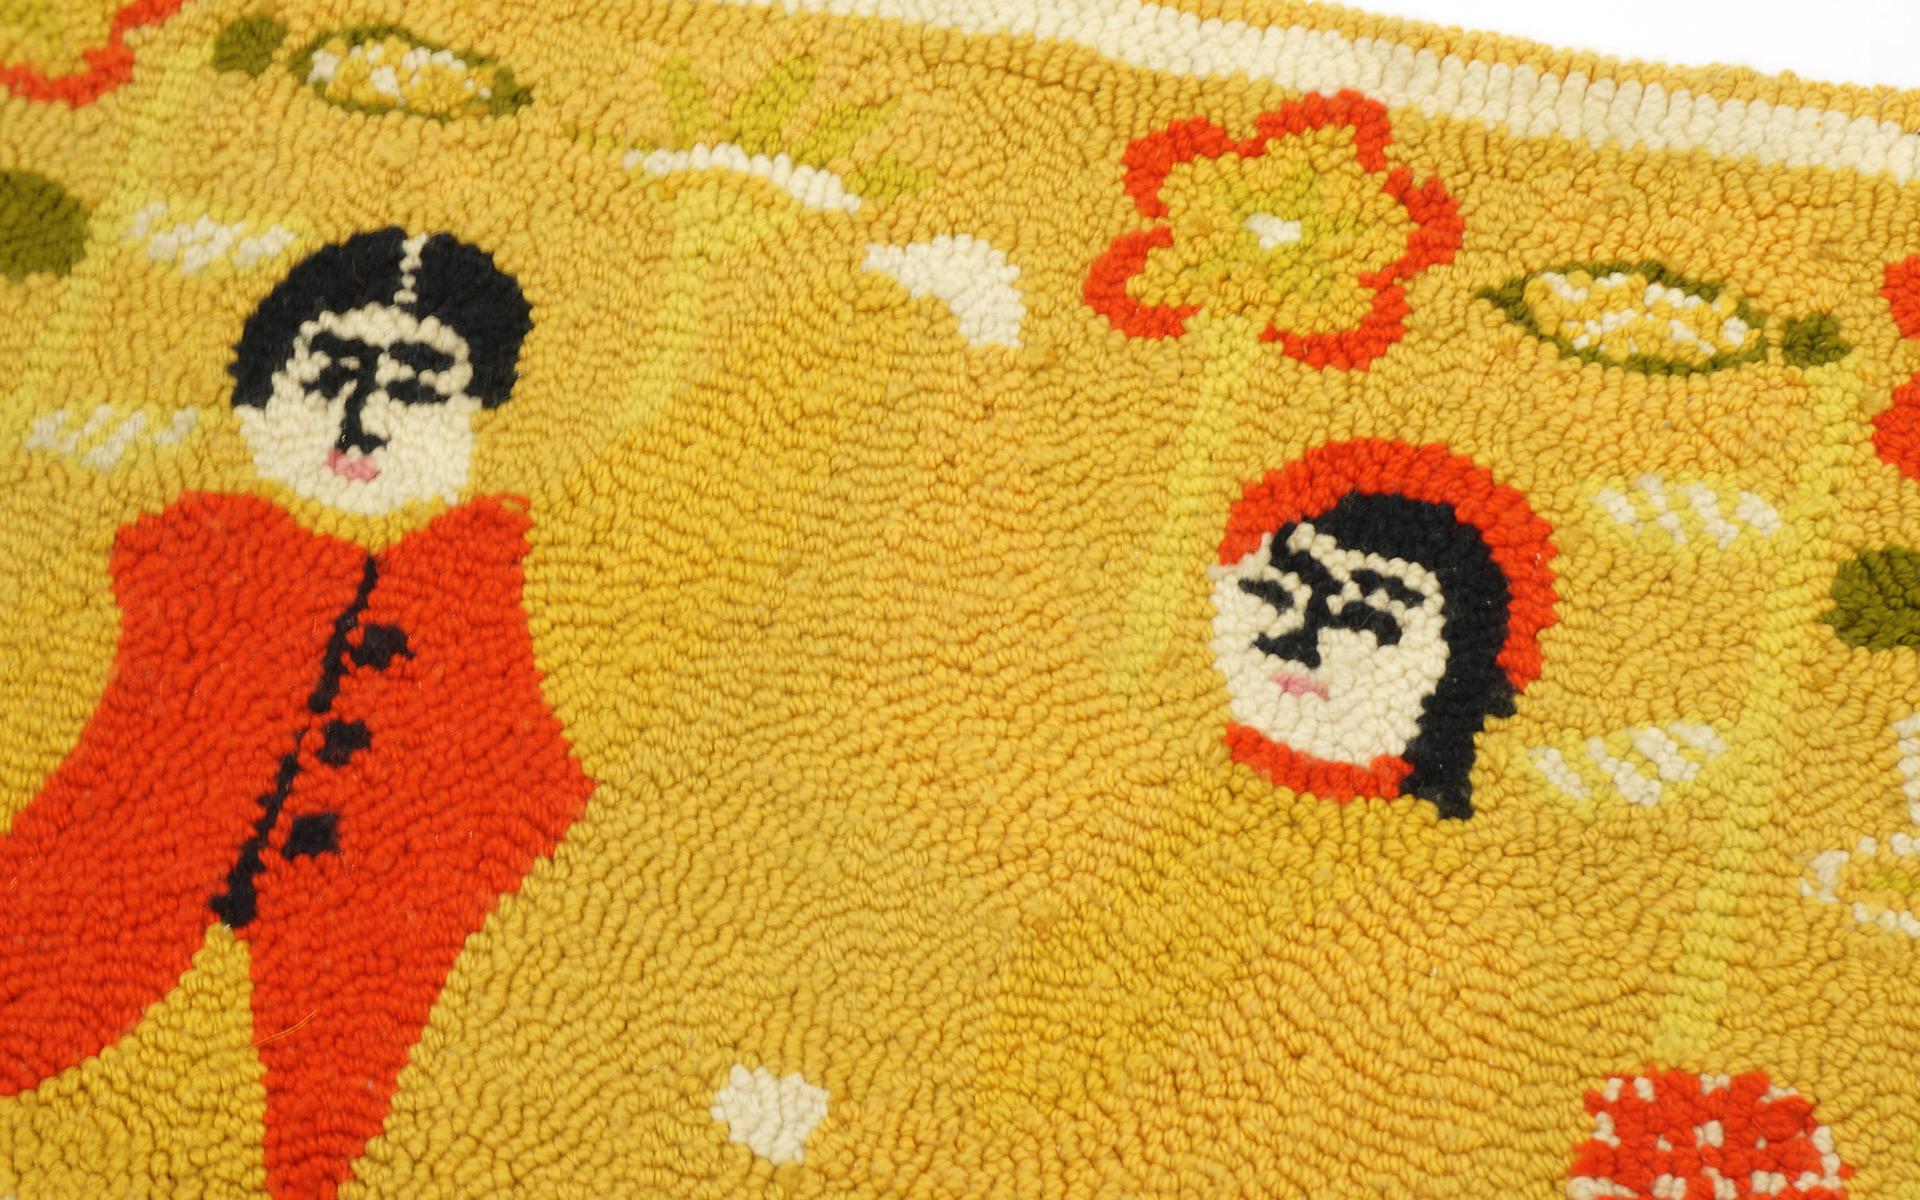 Mid-Century Modern Evelyn Ackerman ERA Hand Hooked Tapestry Rug For Sale